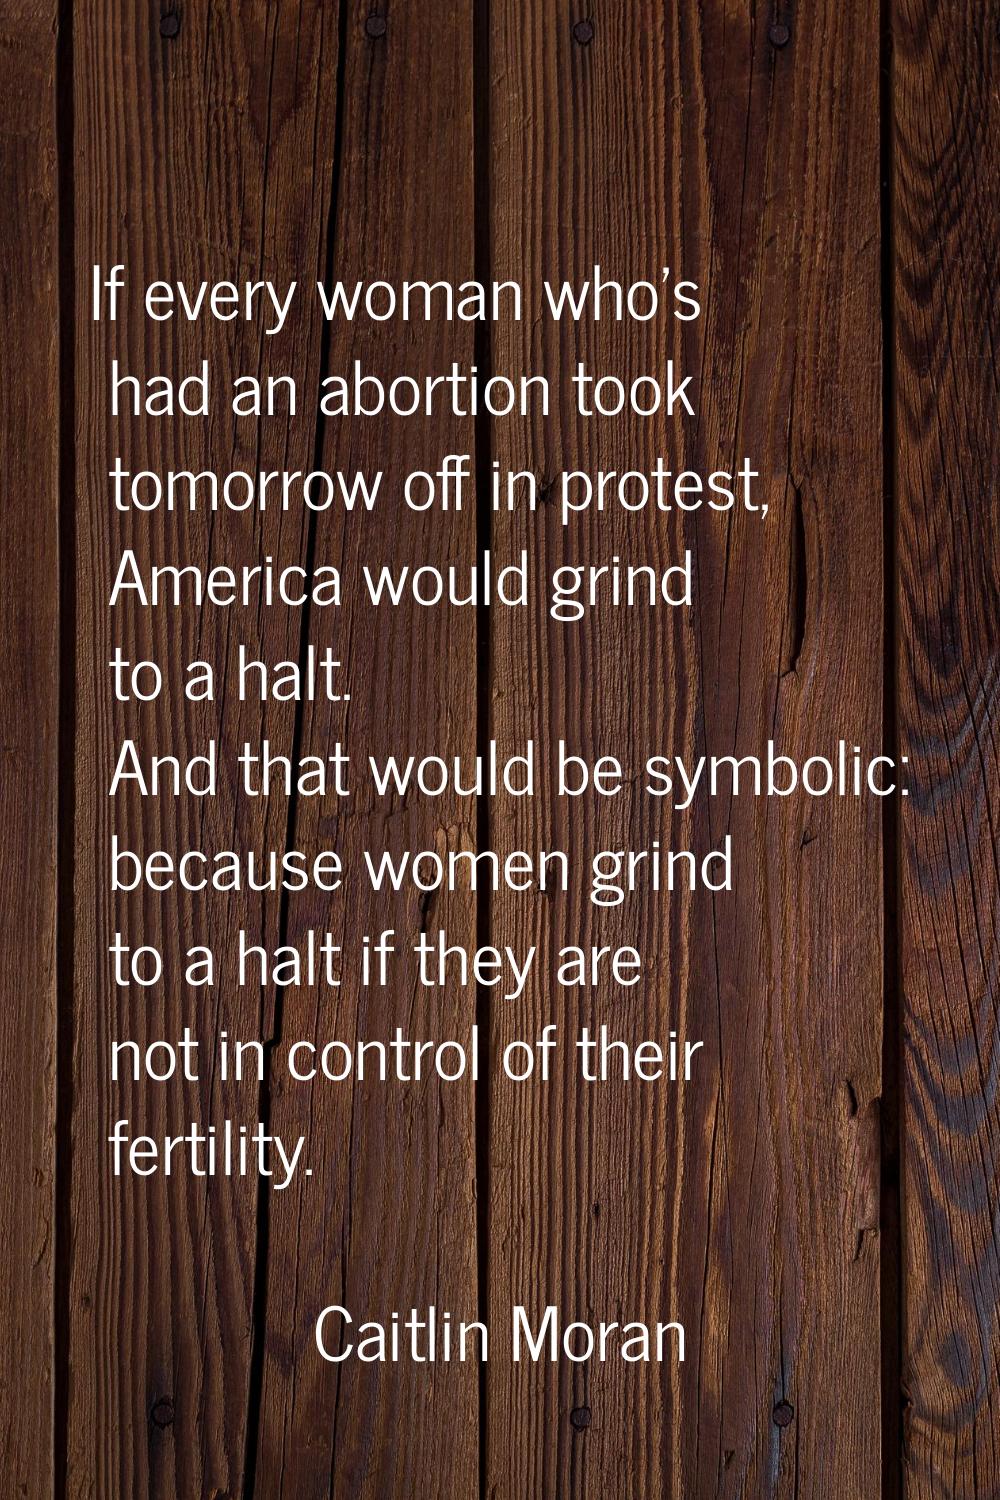 If every woman who's had an abortion took tomorrow off in protest, America would grind to a halt. A